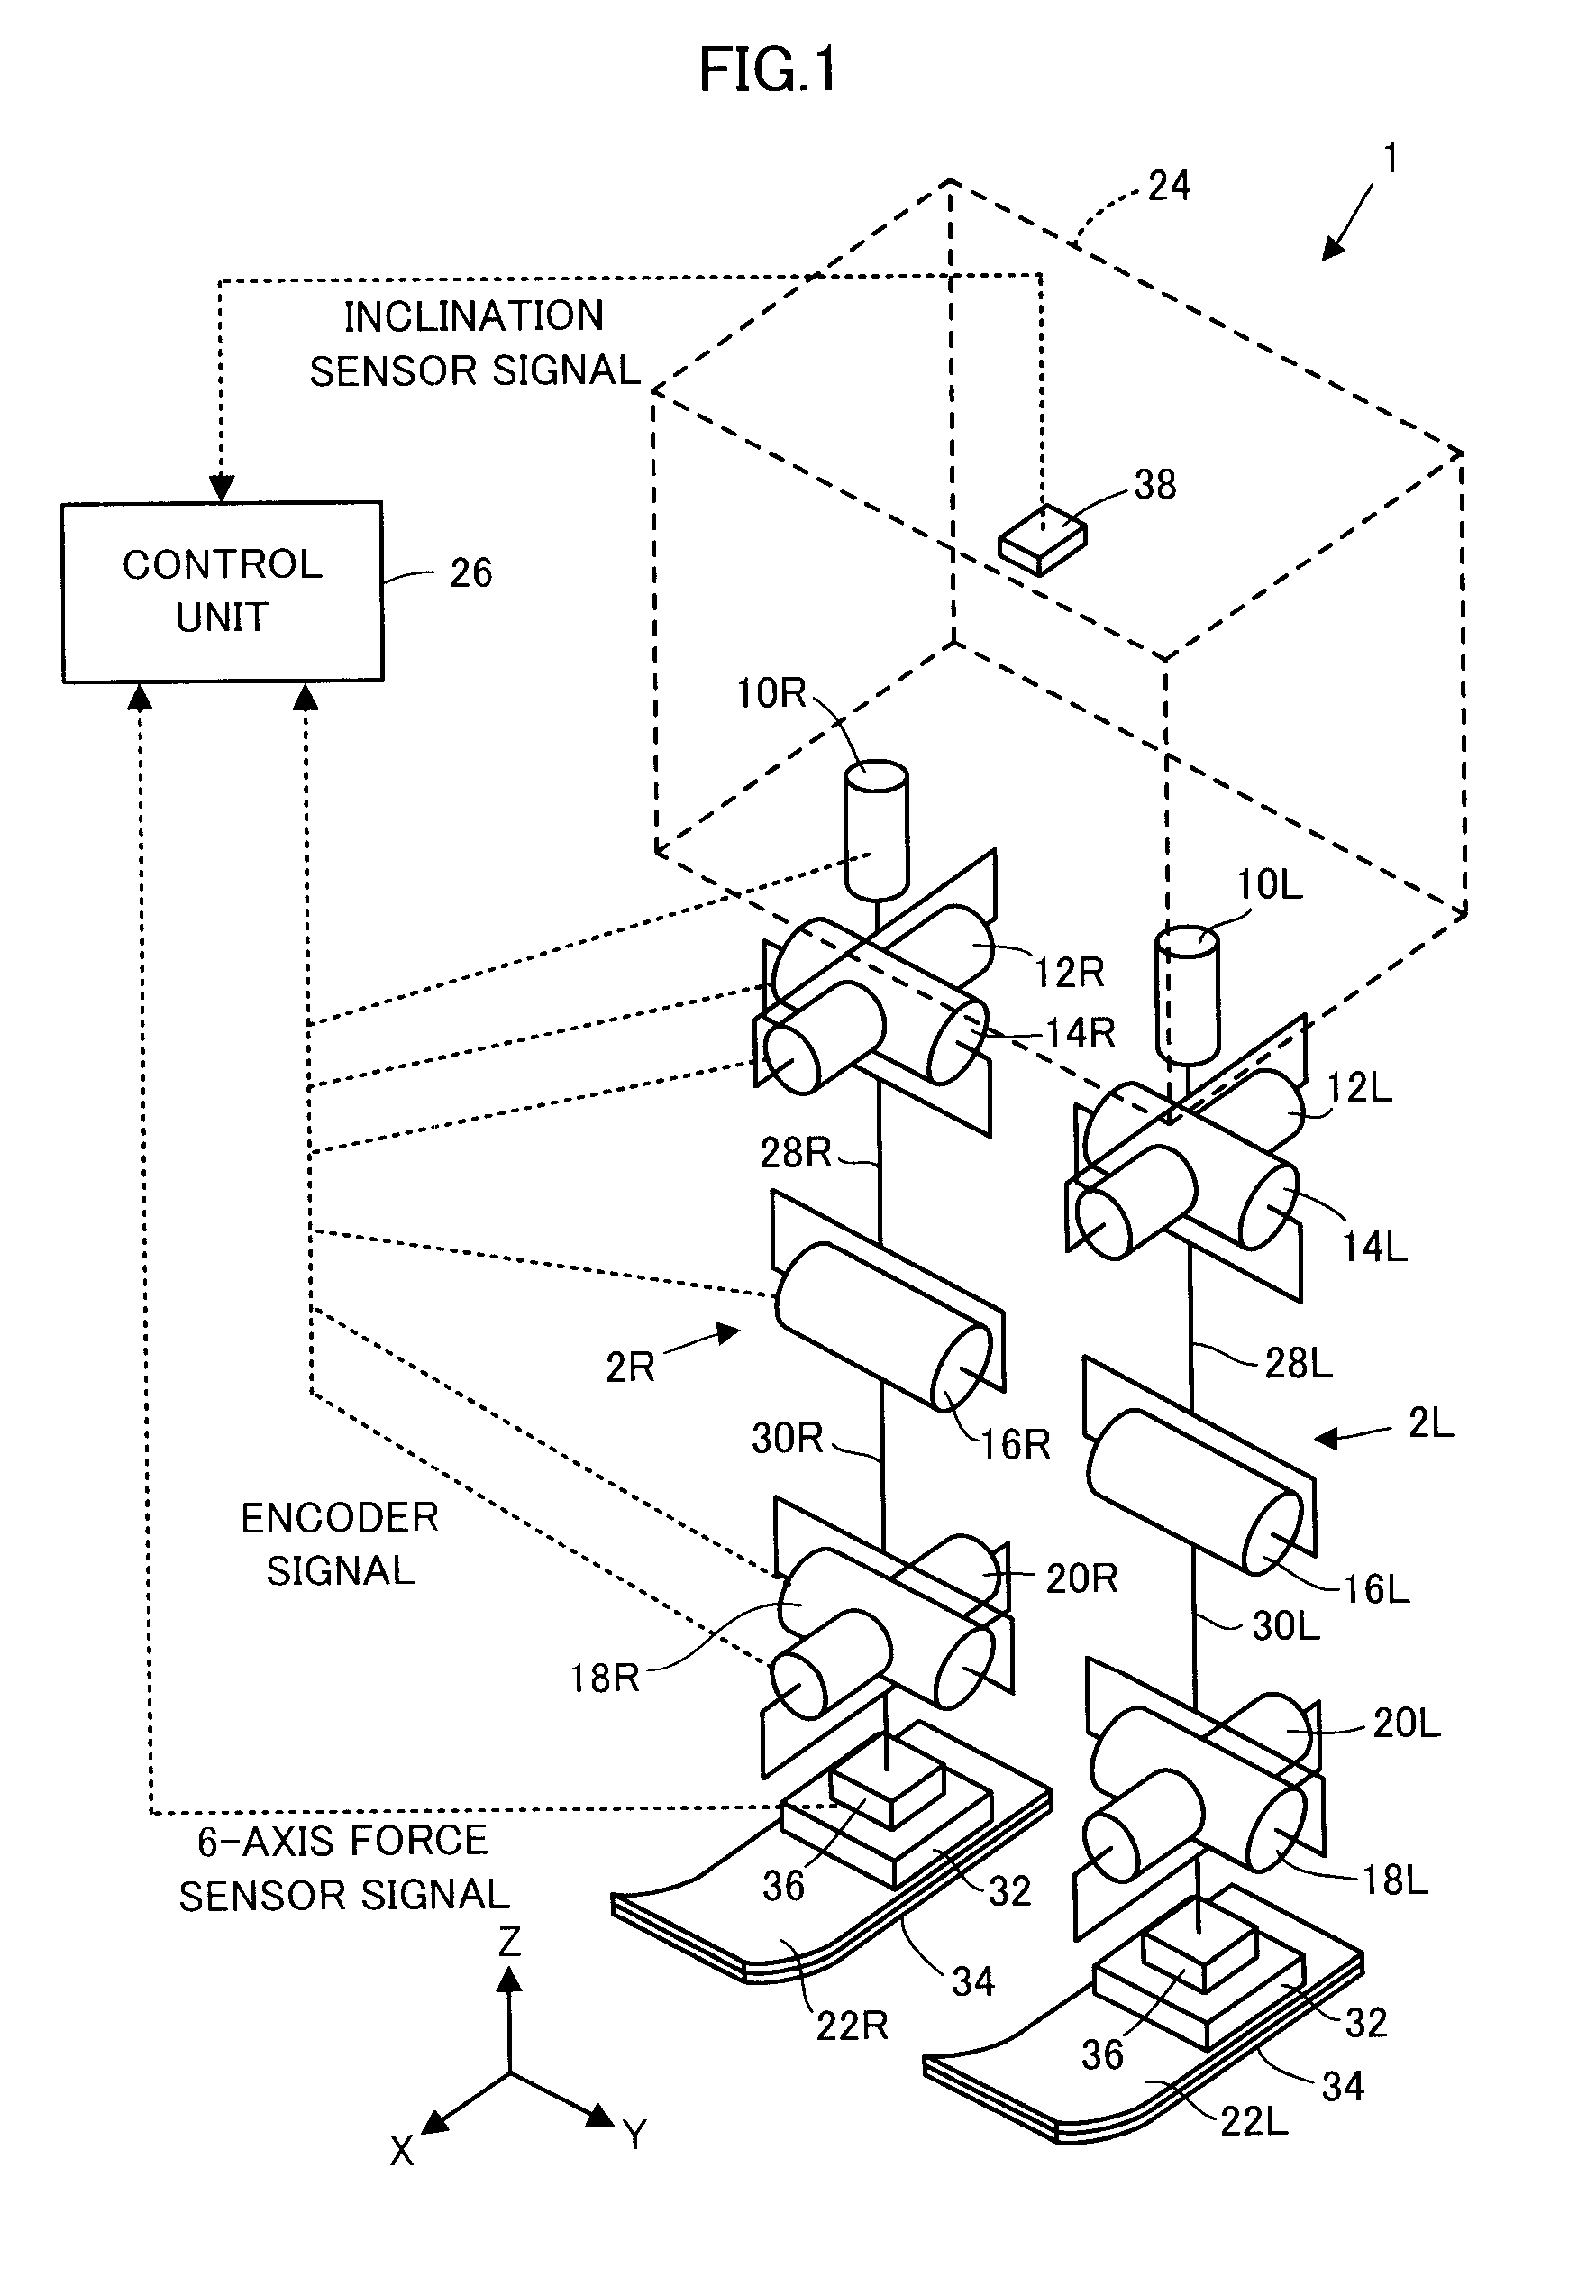 Control device and gait generating device for bipedal mobile robot